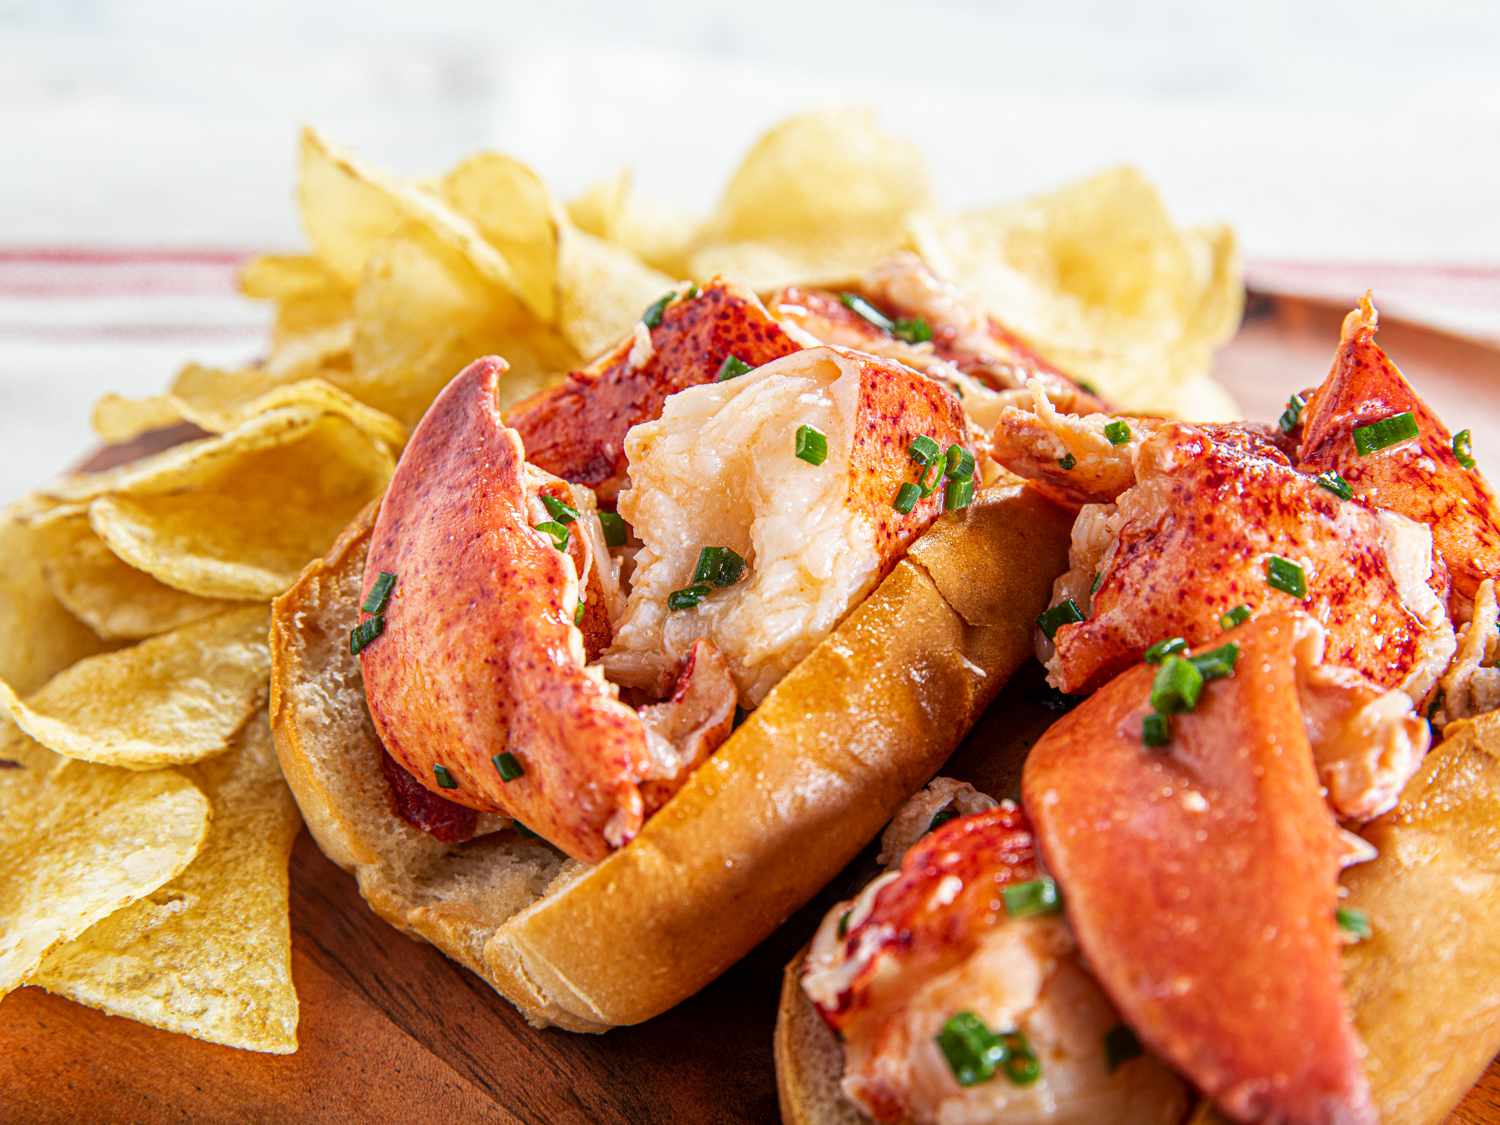 Emeril Lagasse’s Tasty Twist on the Classic Connecticut Lobster Roll